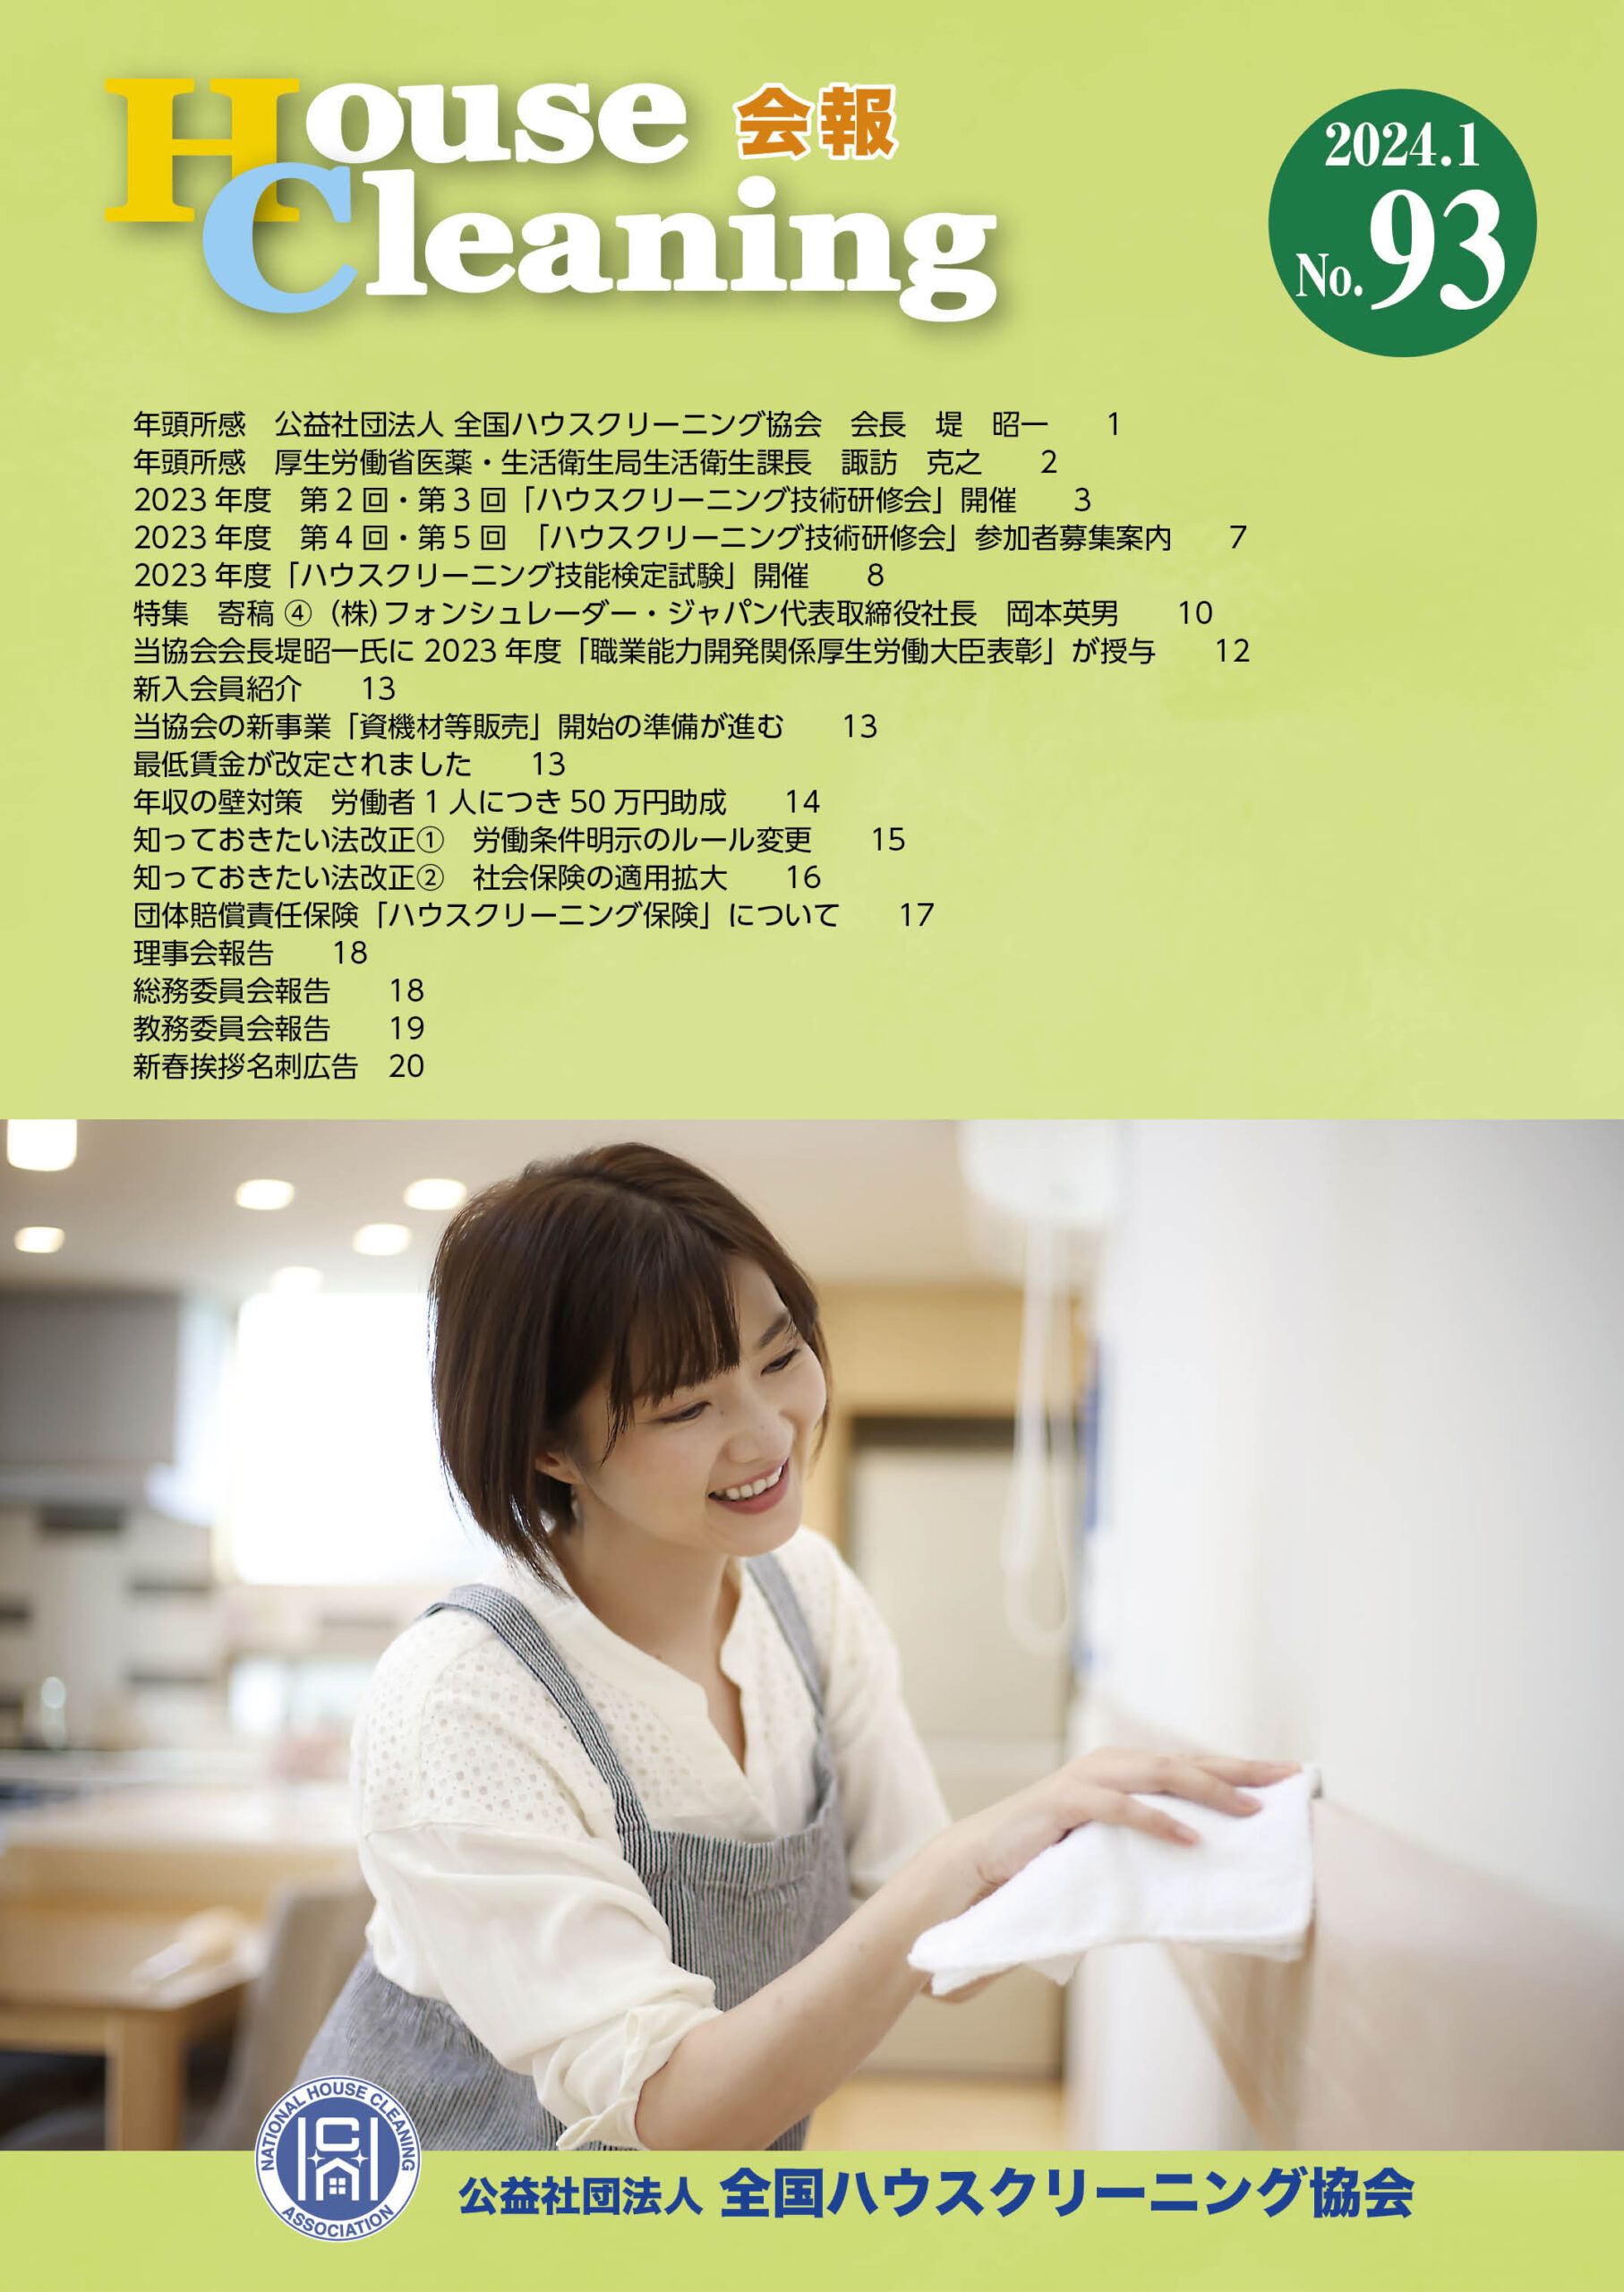 「House Cleaning 会報」